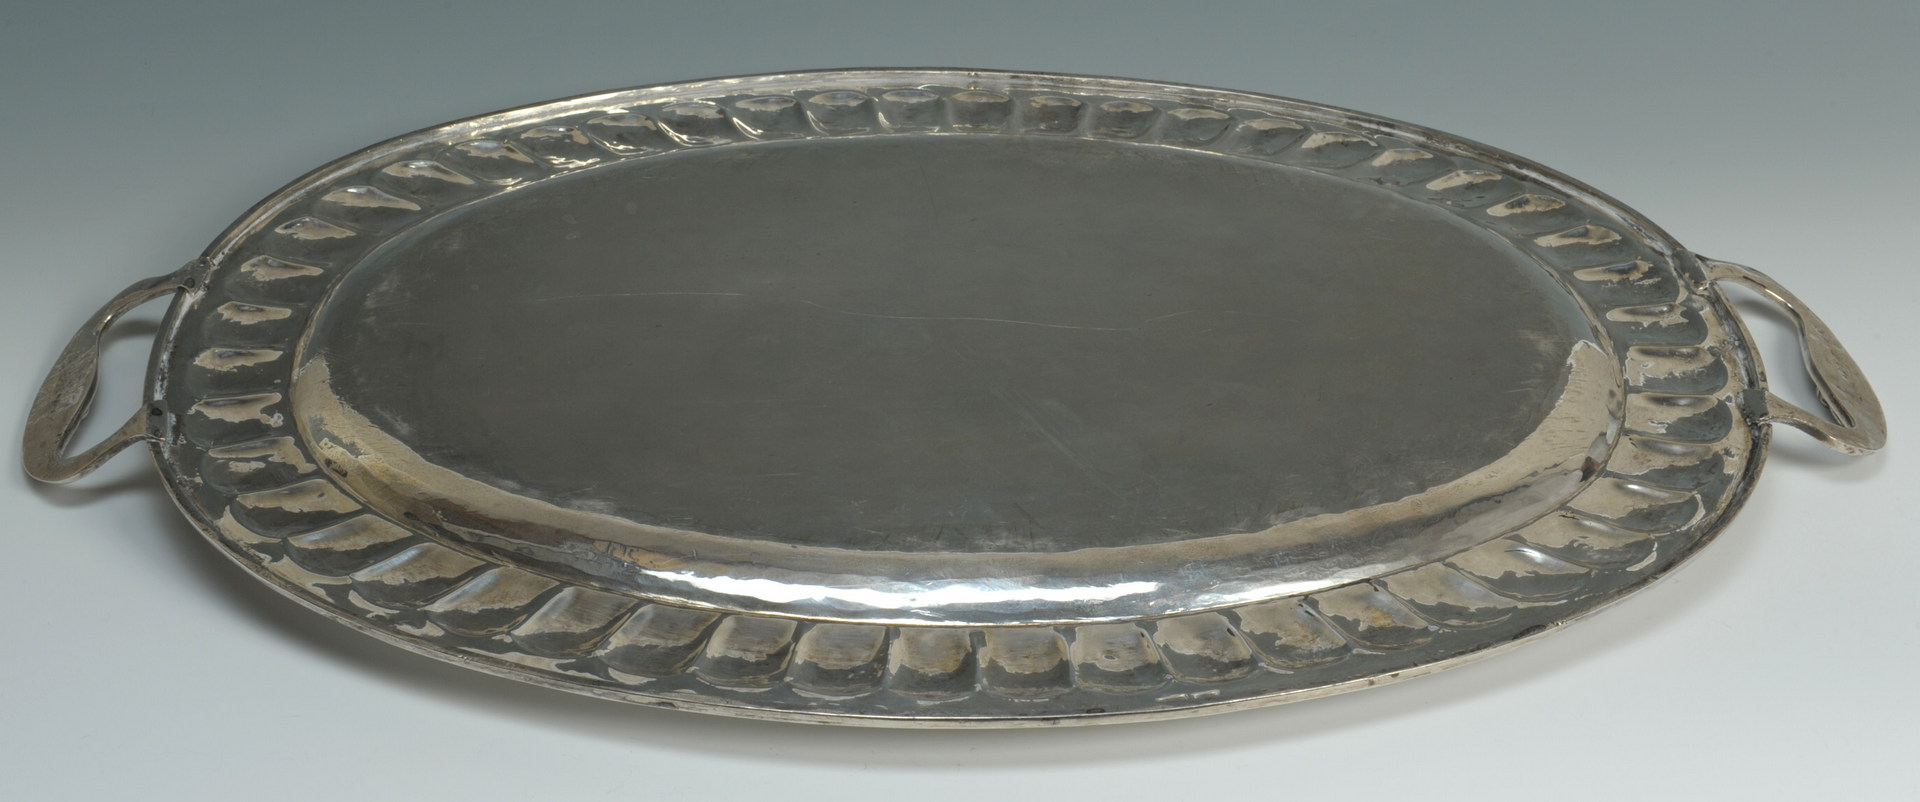 Lot 66: Mexican silver tea service and tray, 15 lbs